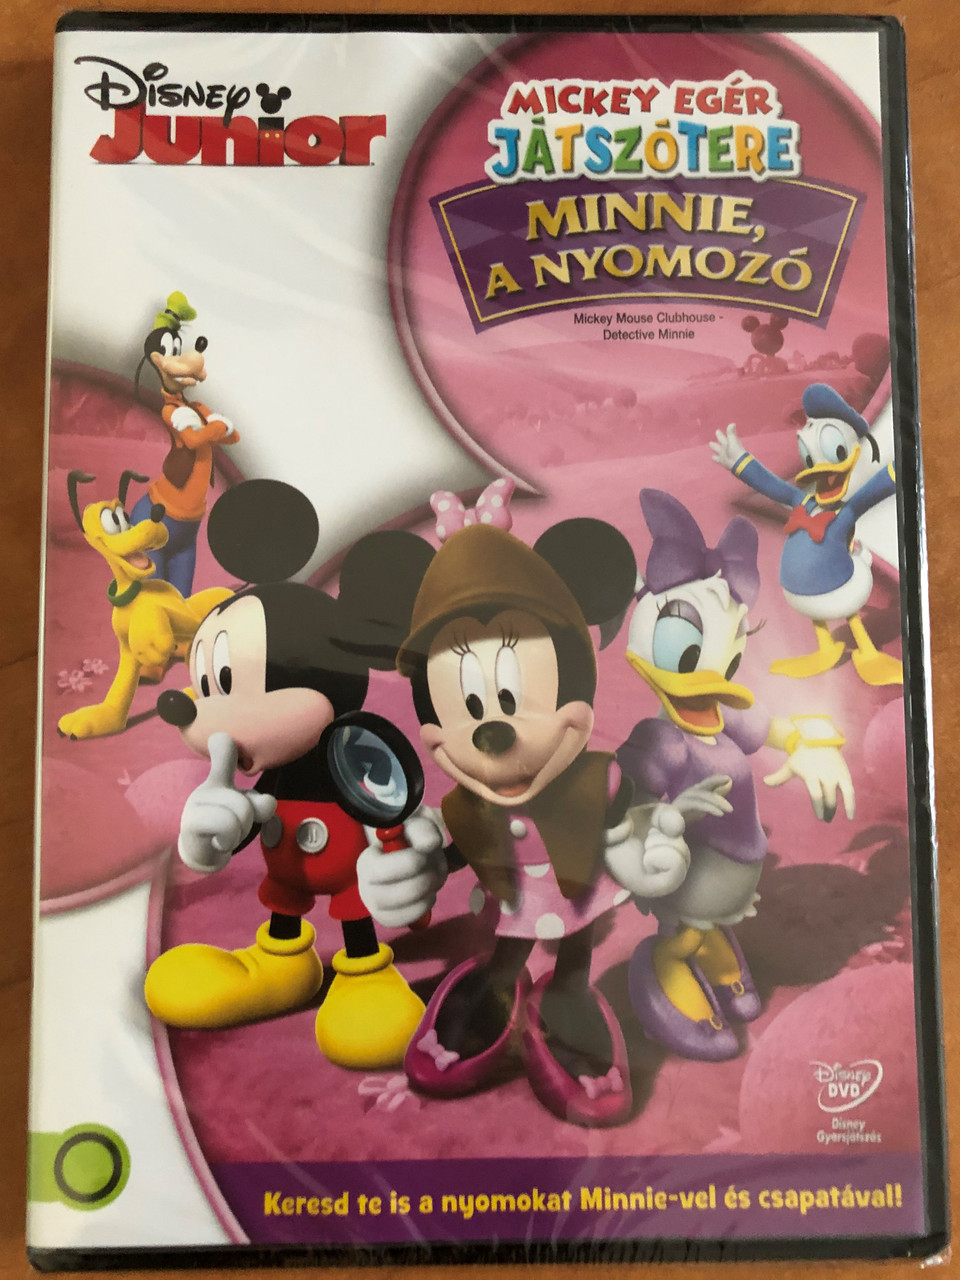 Mickey Mouse clubhouse - Detective Minnie DVD 2006 Mickey Egér Játszótere -  Minnie a nyomozó / Directed by Donovan Cook / Story by Bobs Gannaway -  Bible in My Language